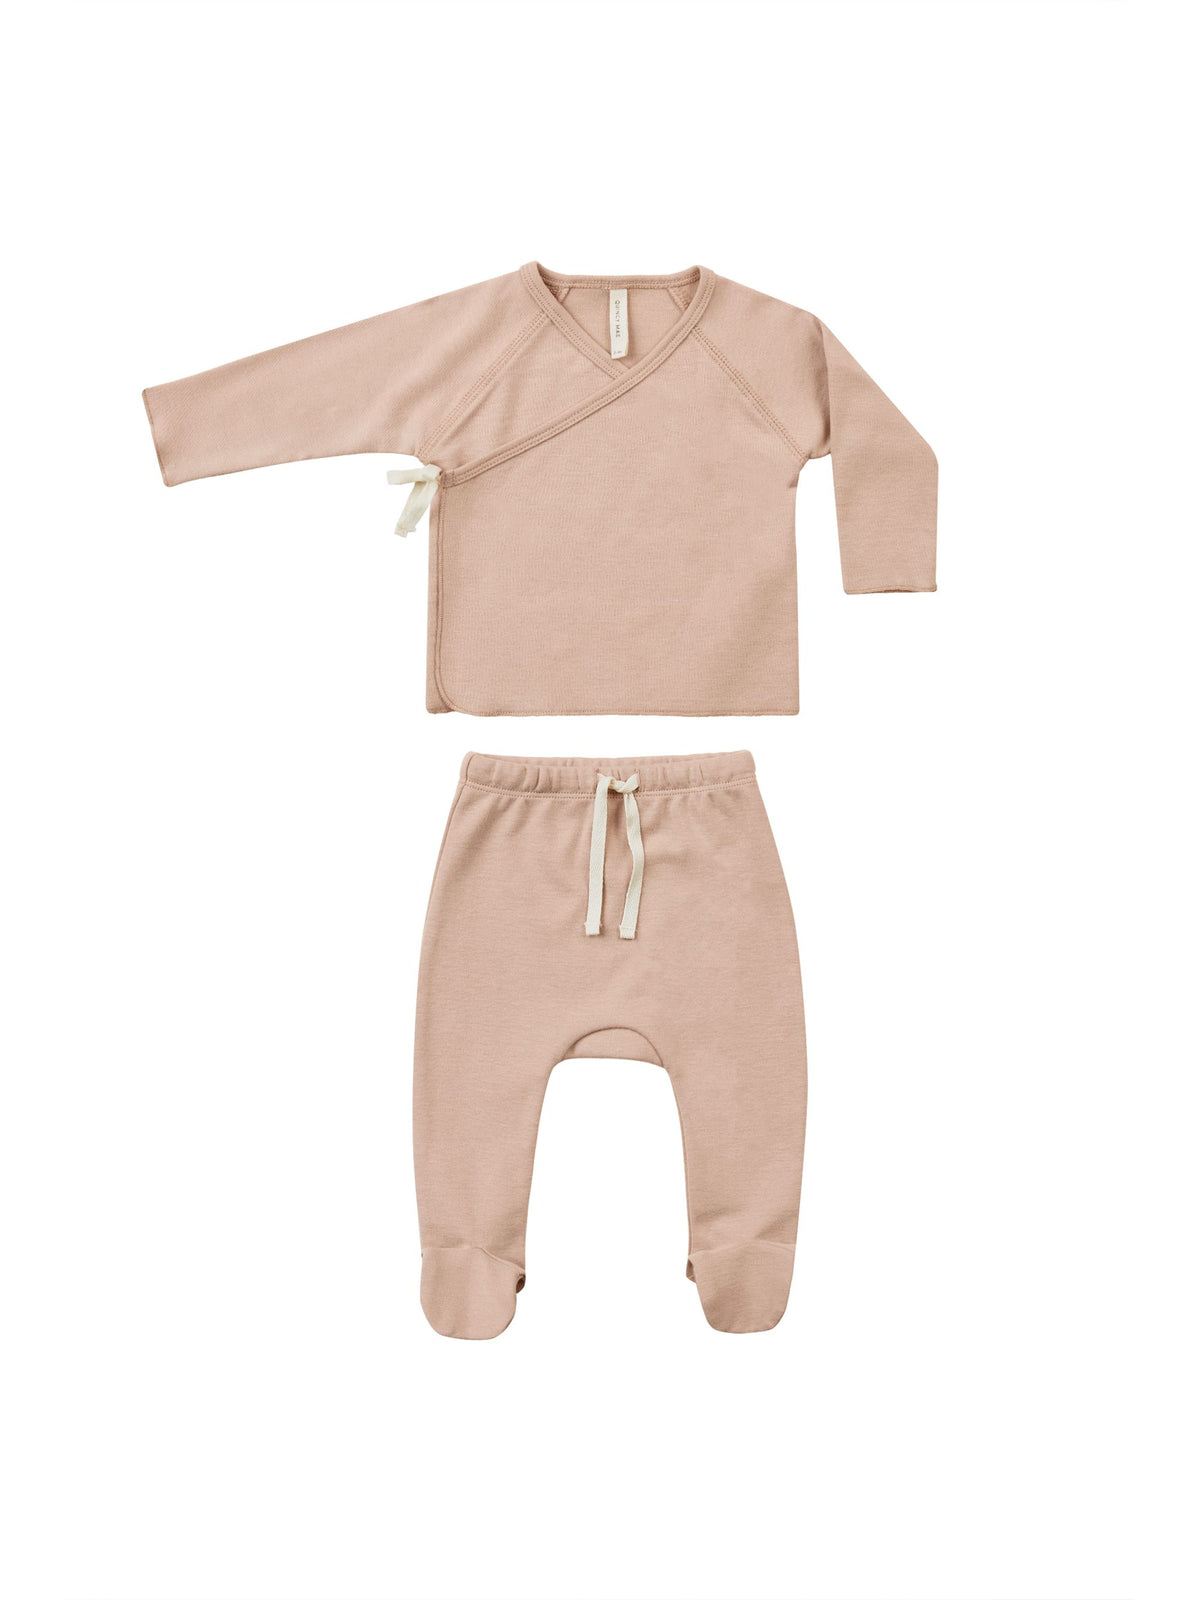 quincy mae wrap top + footed pant set - blush